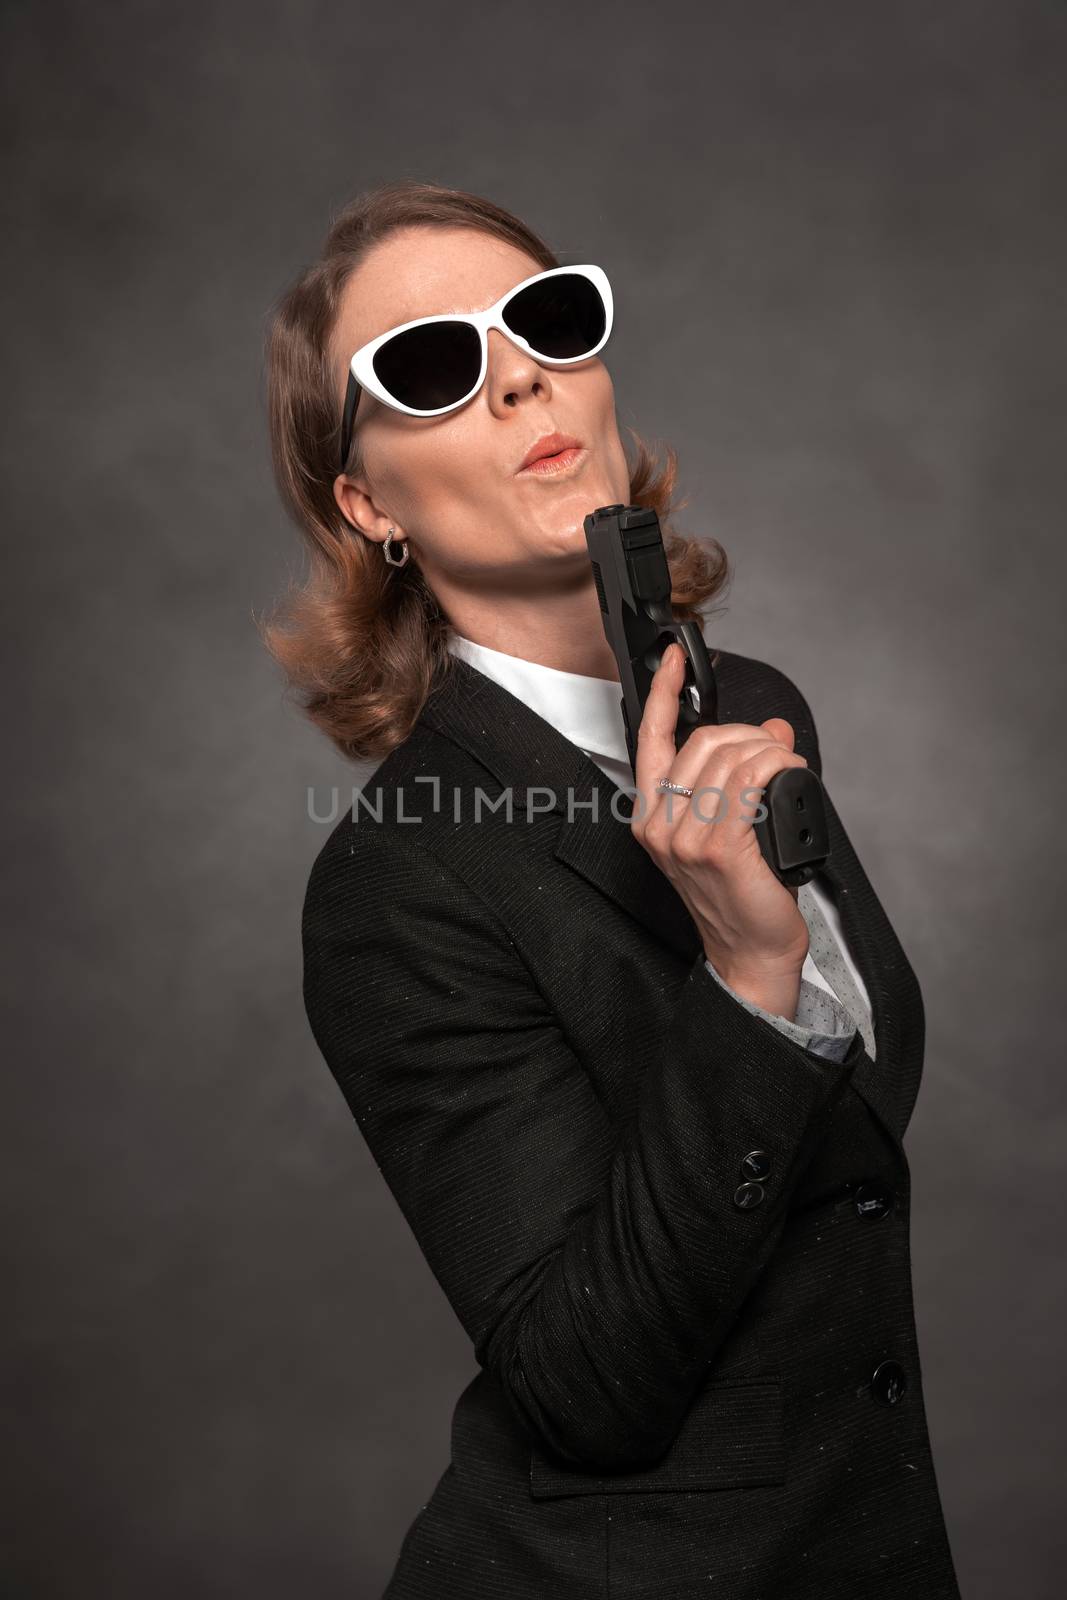 criminal policewoman in civilian clothes with a gun in her hand. portrait with dark background.